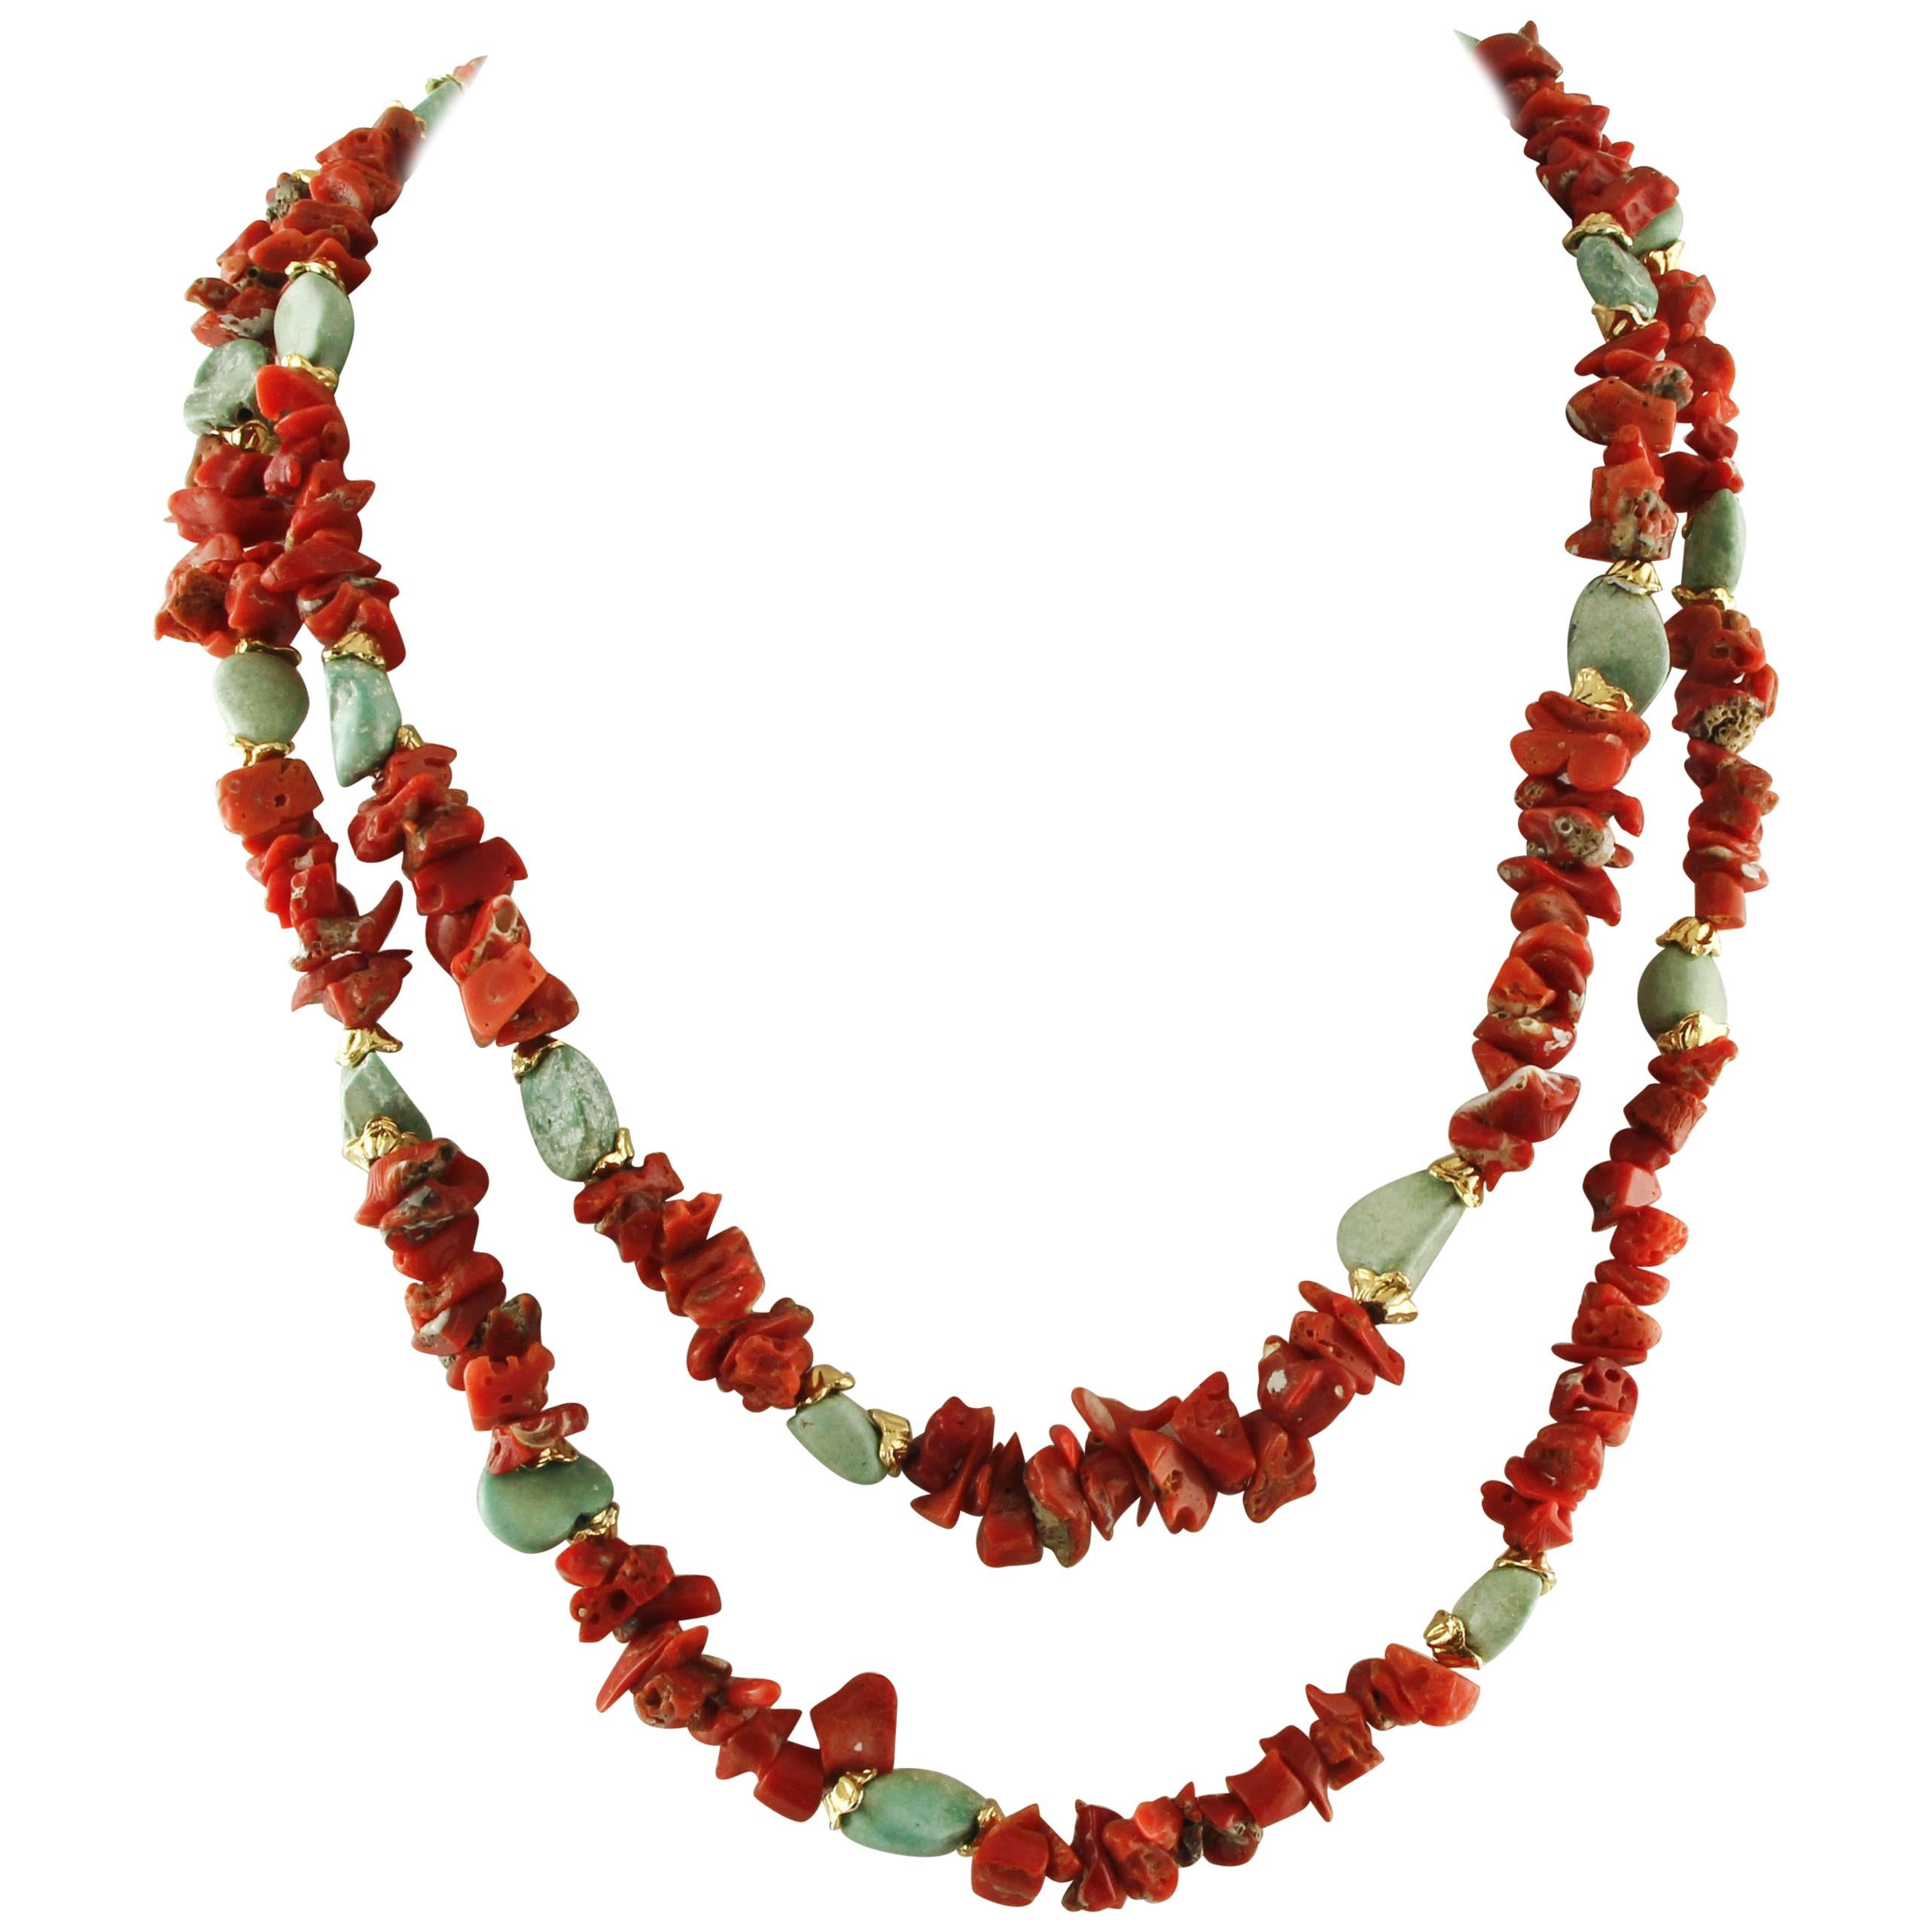 Red Corals, Turquoise Stones, Rope / Multi-Strand Necklace